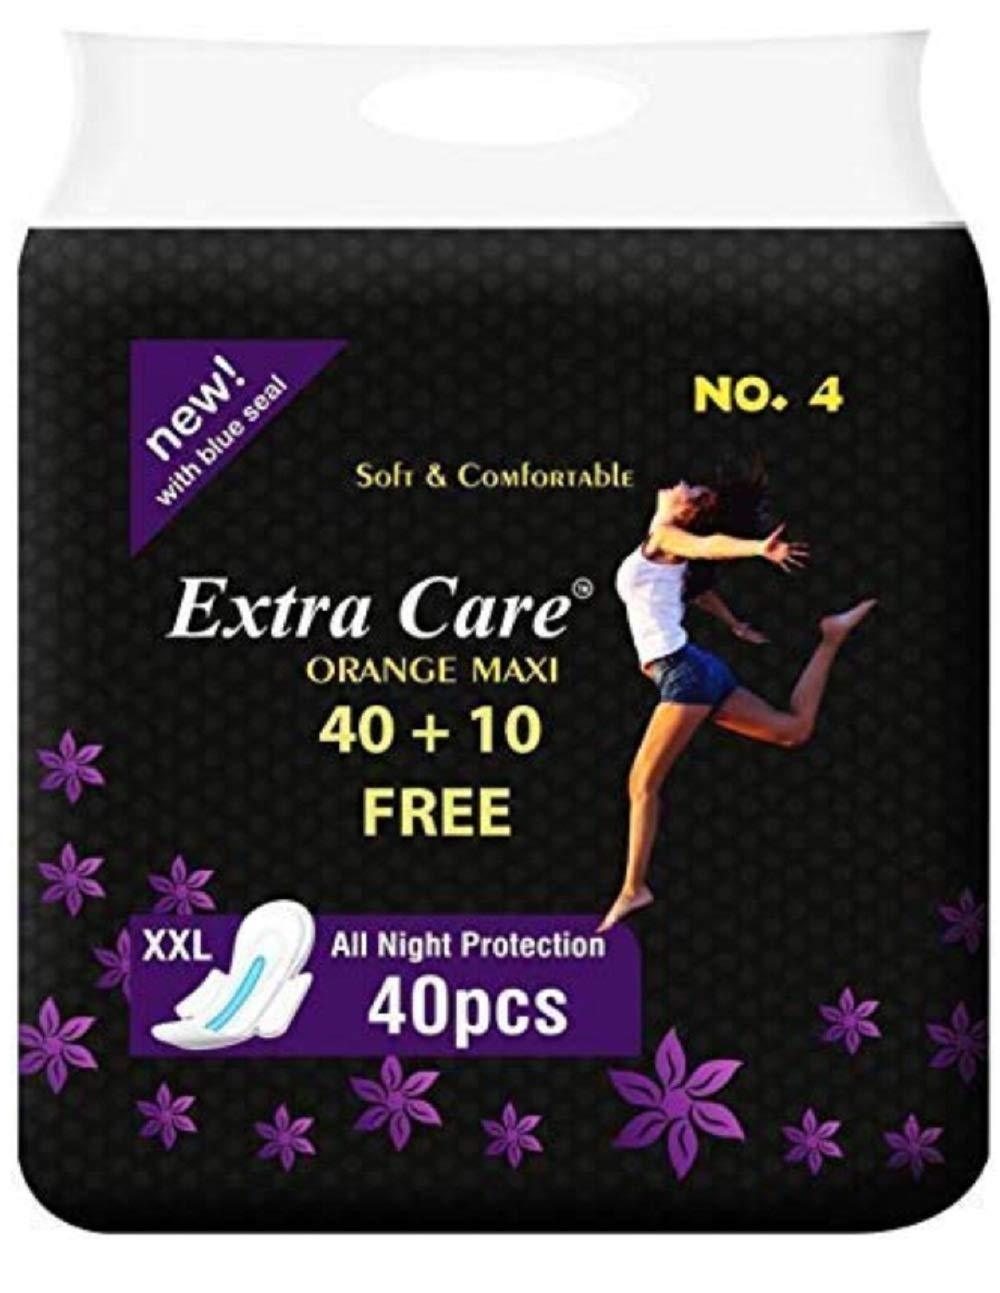 Extra Care Black Maxi Sanitary Pads for Women | Skin Friendly, Odour free Sanitary Napkins (40 Sanitary Pads + 10 Panty Liners, Size 2XL)